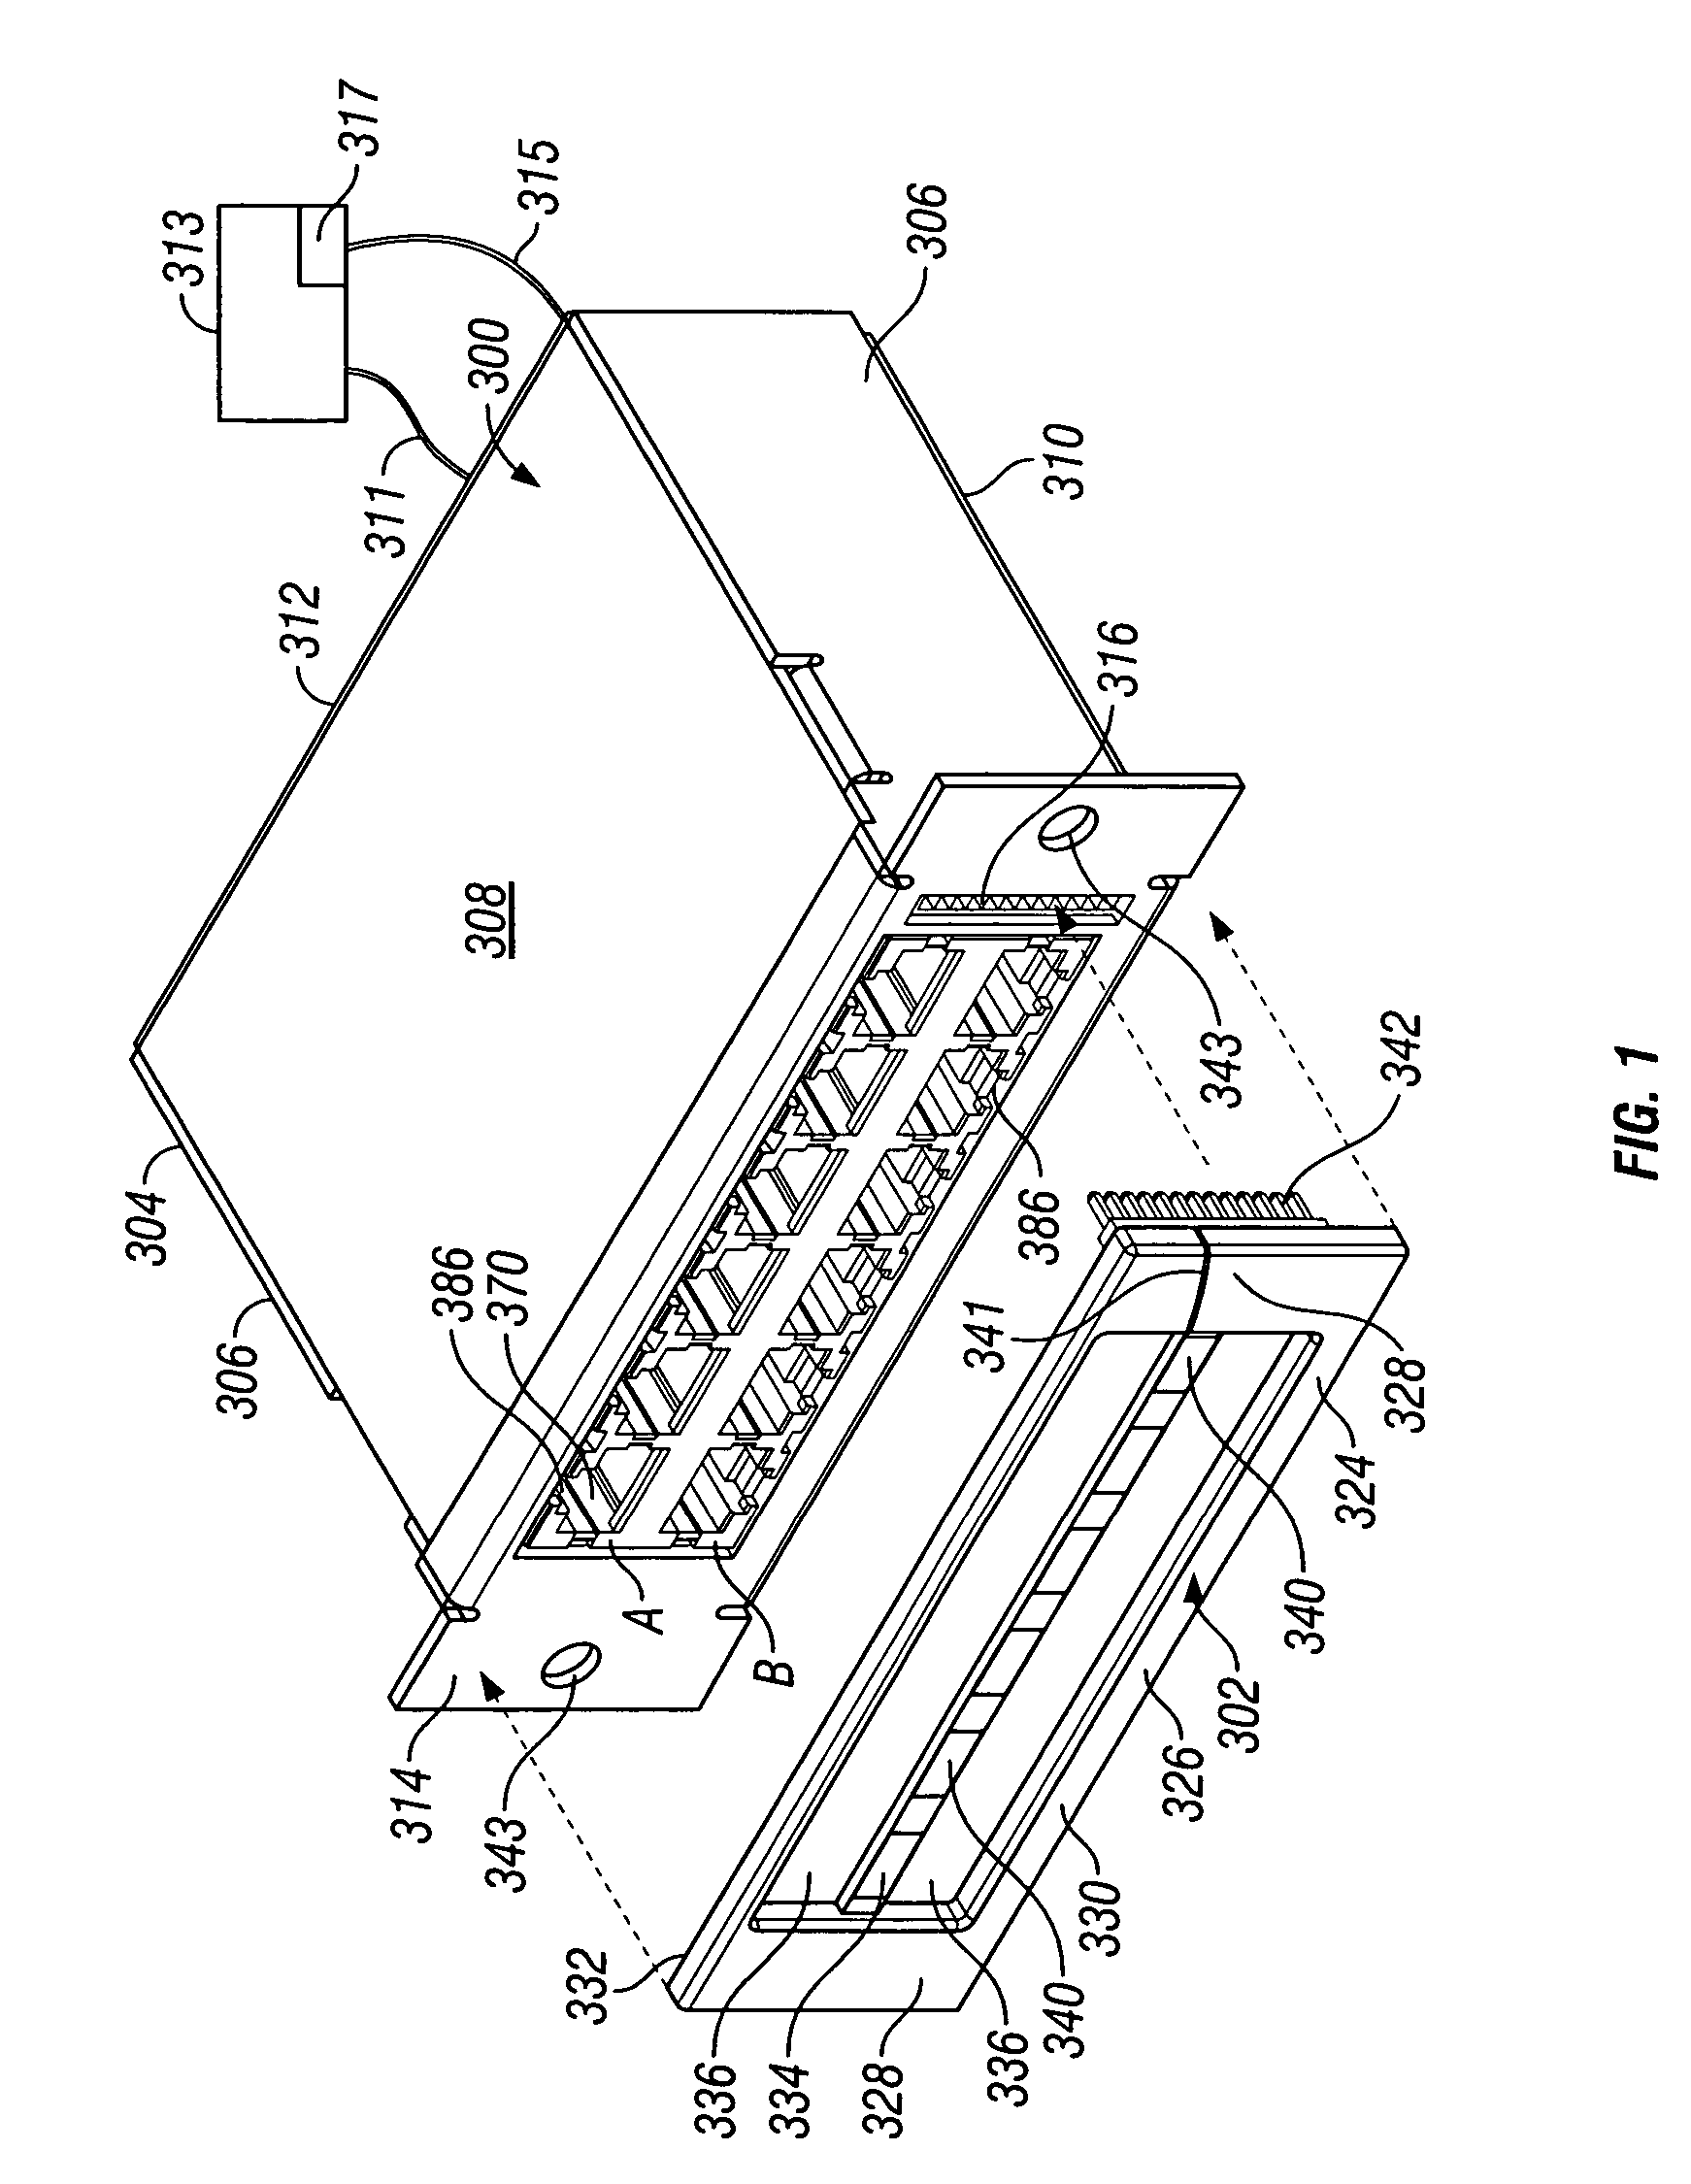 Network connection sensing assembly